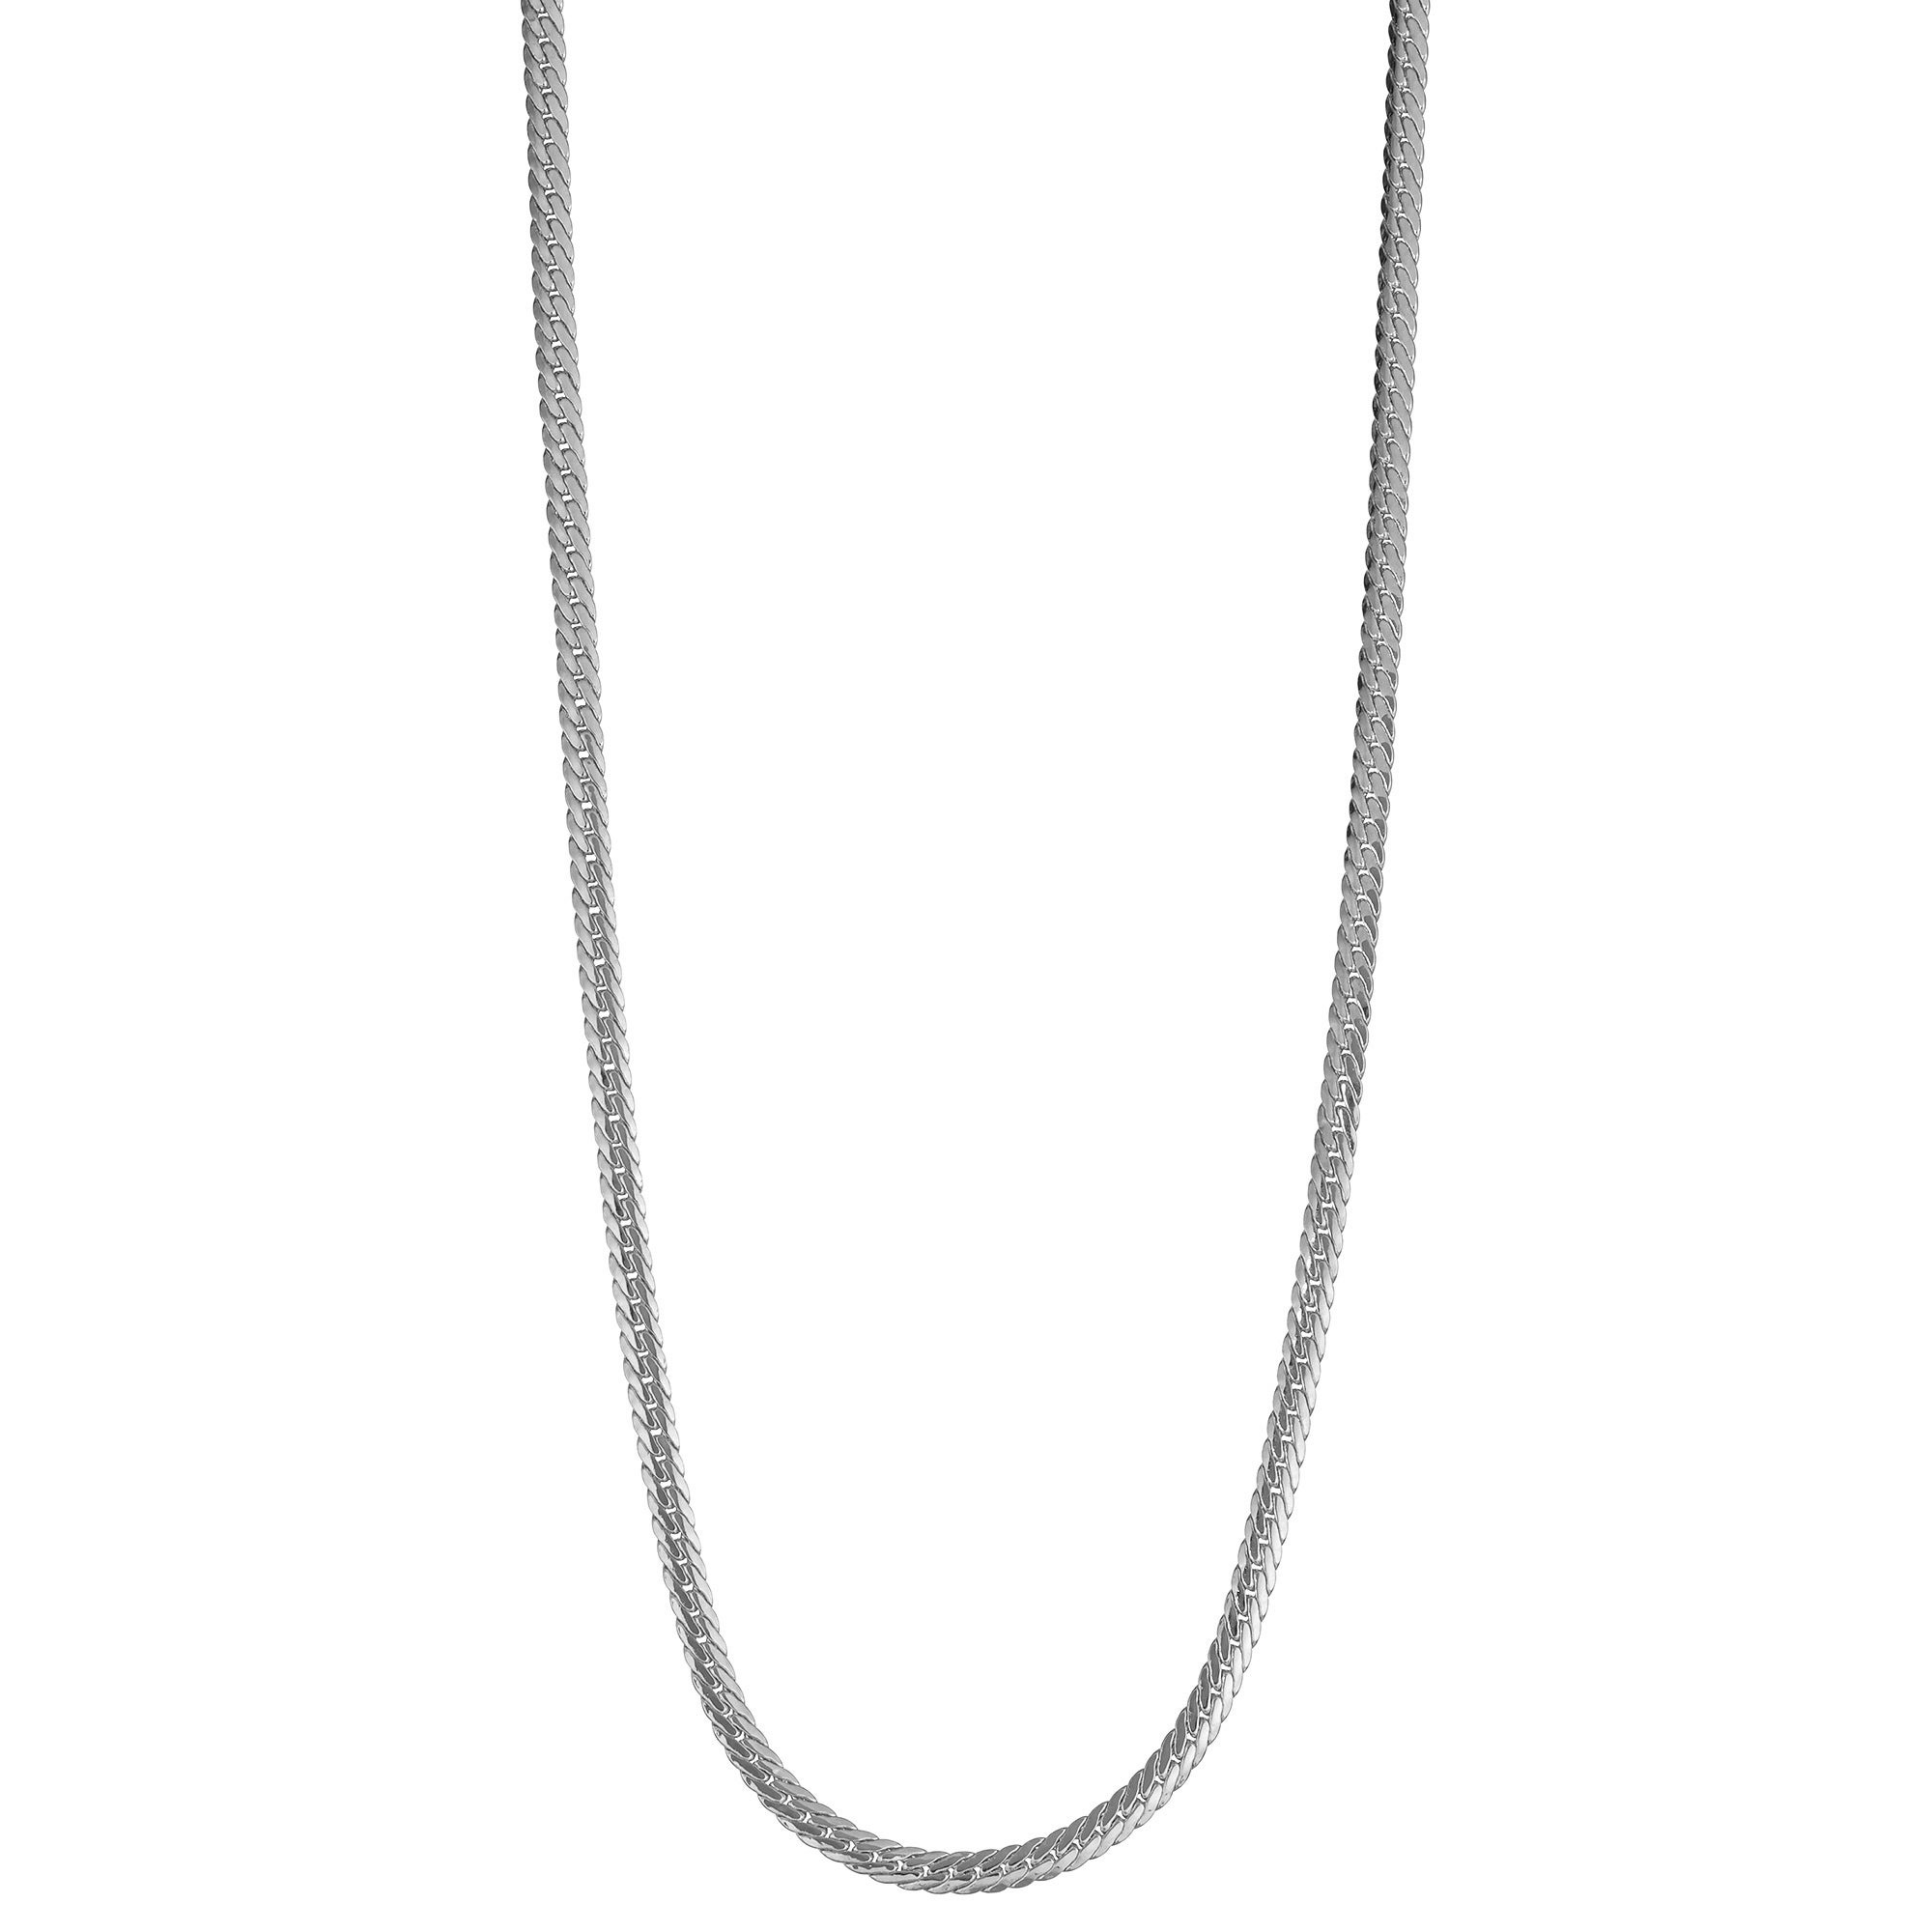 18 INCHES 1.4MM STERLING SILVER ITALIAN HERRINGBONE CHAIN 925 STERLING SILVER NECKLACE